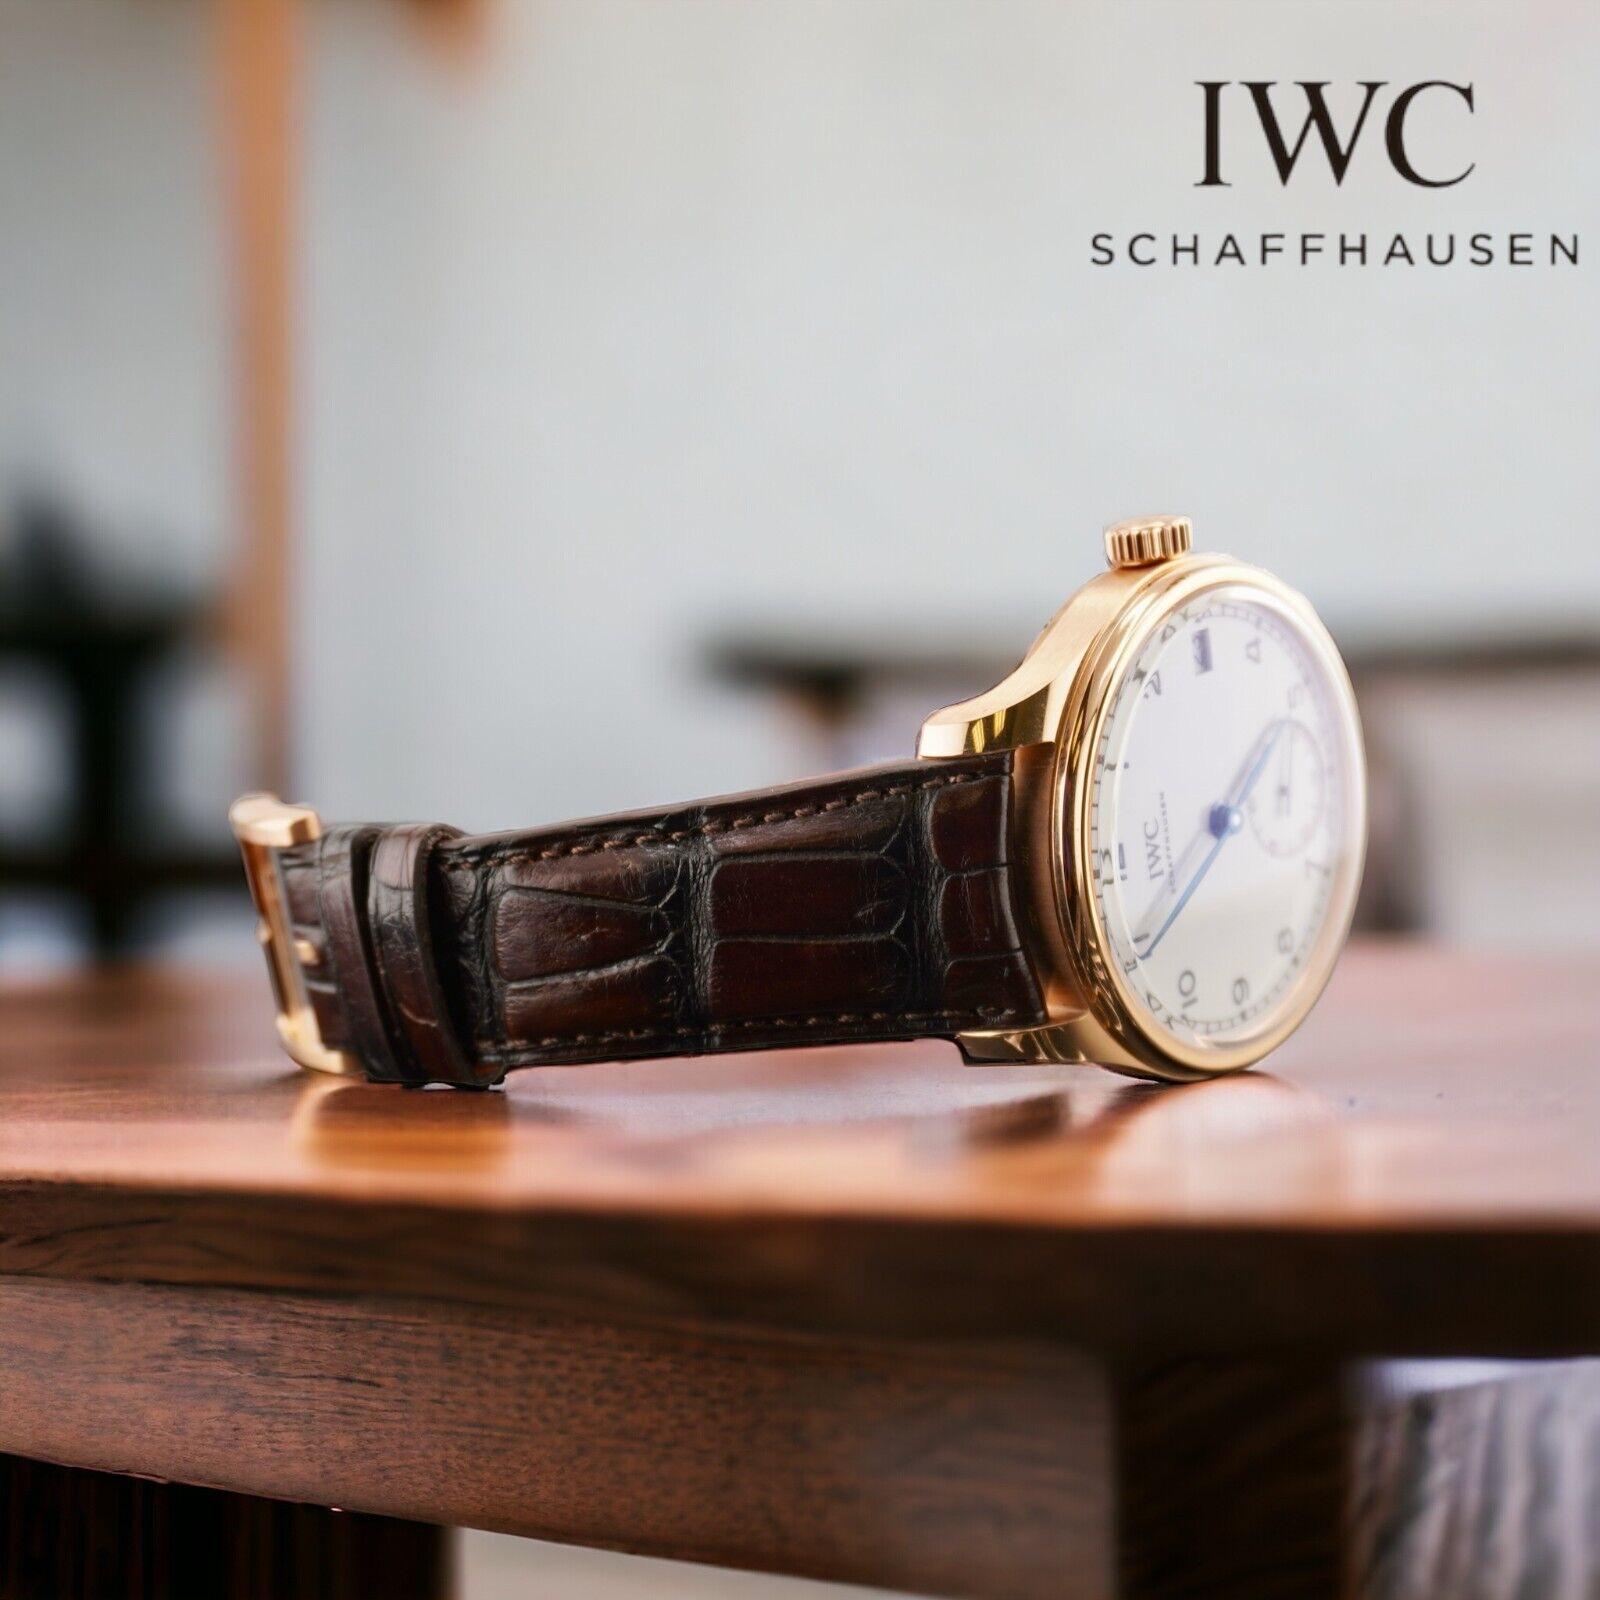 IWC 43MM Schaffhausen Portugieser Watch

Pre-owned w/ Original Box & Card
100% Authentic Authenticity Card
Condition - (Excellent Condition) - See Pics
Watch Reference - IW510211
Model - Schaffhausen Portugieser
Dial Color - White
Material - 18k